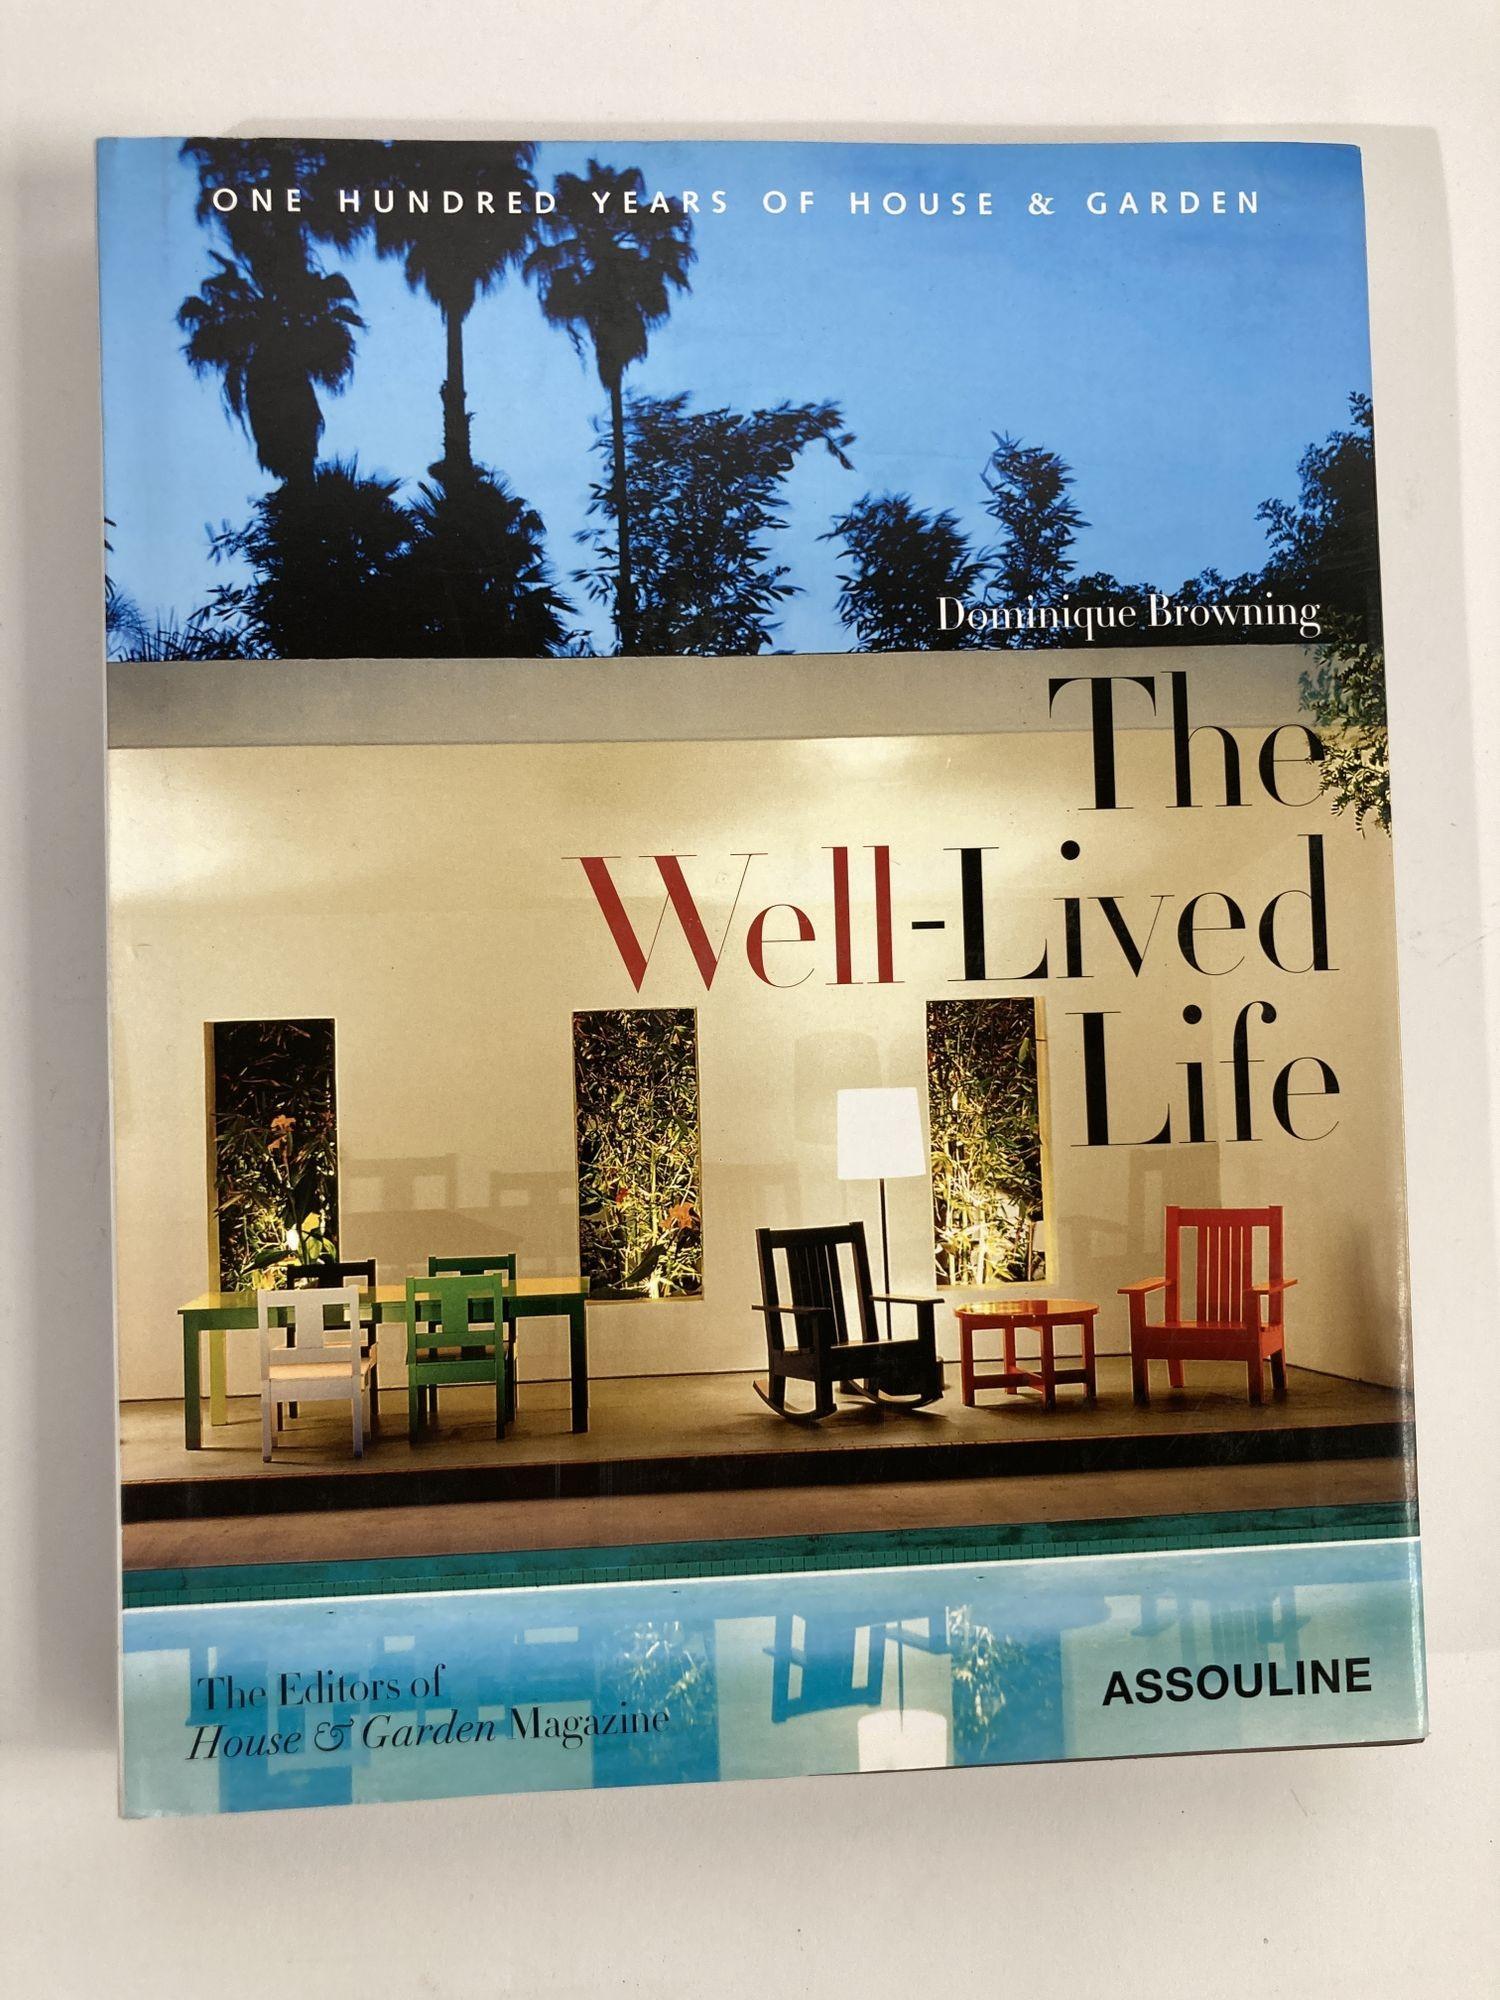 The Well-lived Life: One Hundred Years of House & Garden by Dominique Browning.
Assouline Publishing, Inc. 2008.
Large hardcover coffee table book.
Size: 12 1/8